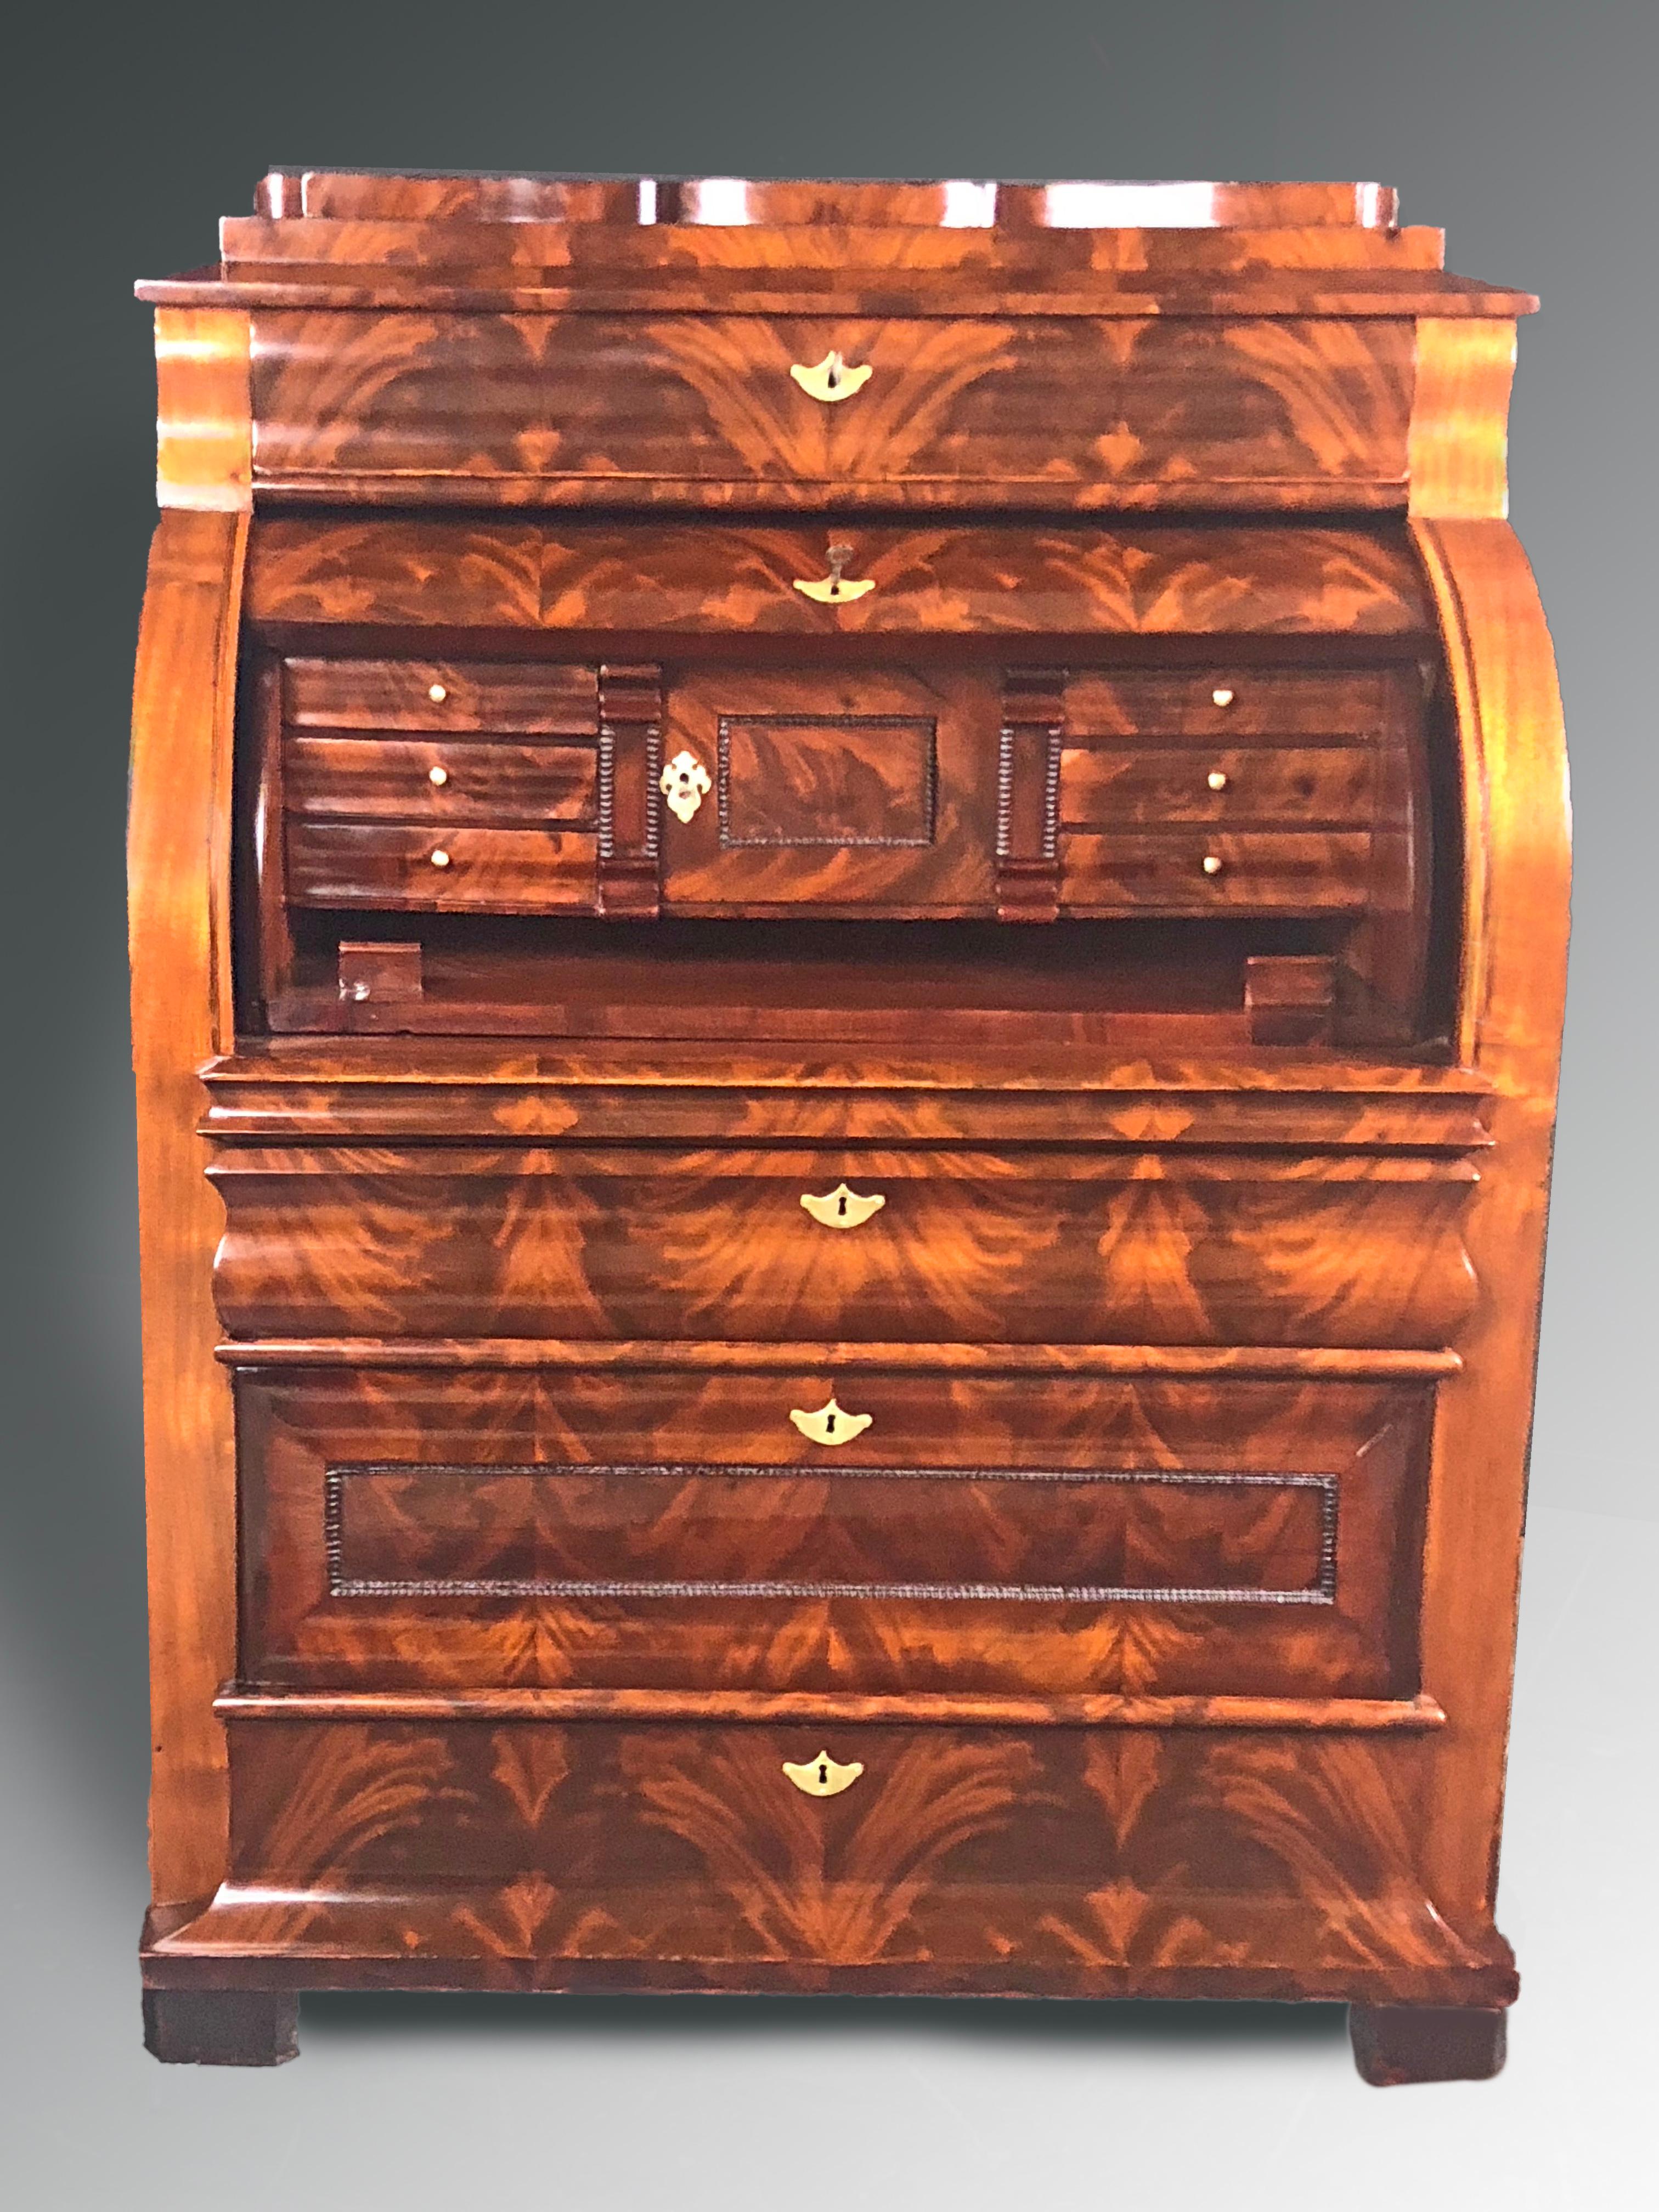 Outstanding Danish Biedermeier cylinder top Bureau dating to the mid-19th century with impressive crotch mahogany veneers. Once open, the cylinder top reveals a series of small drawers flanking a central locking cabinet and a writing surface that